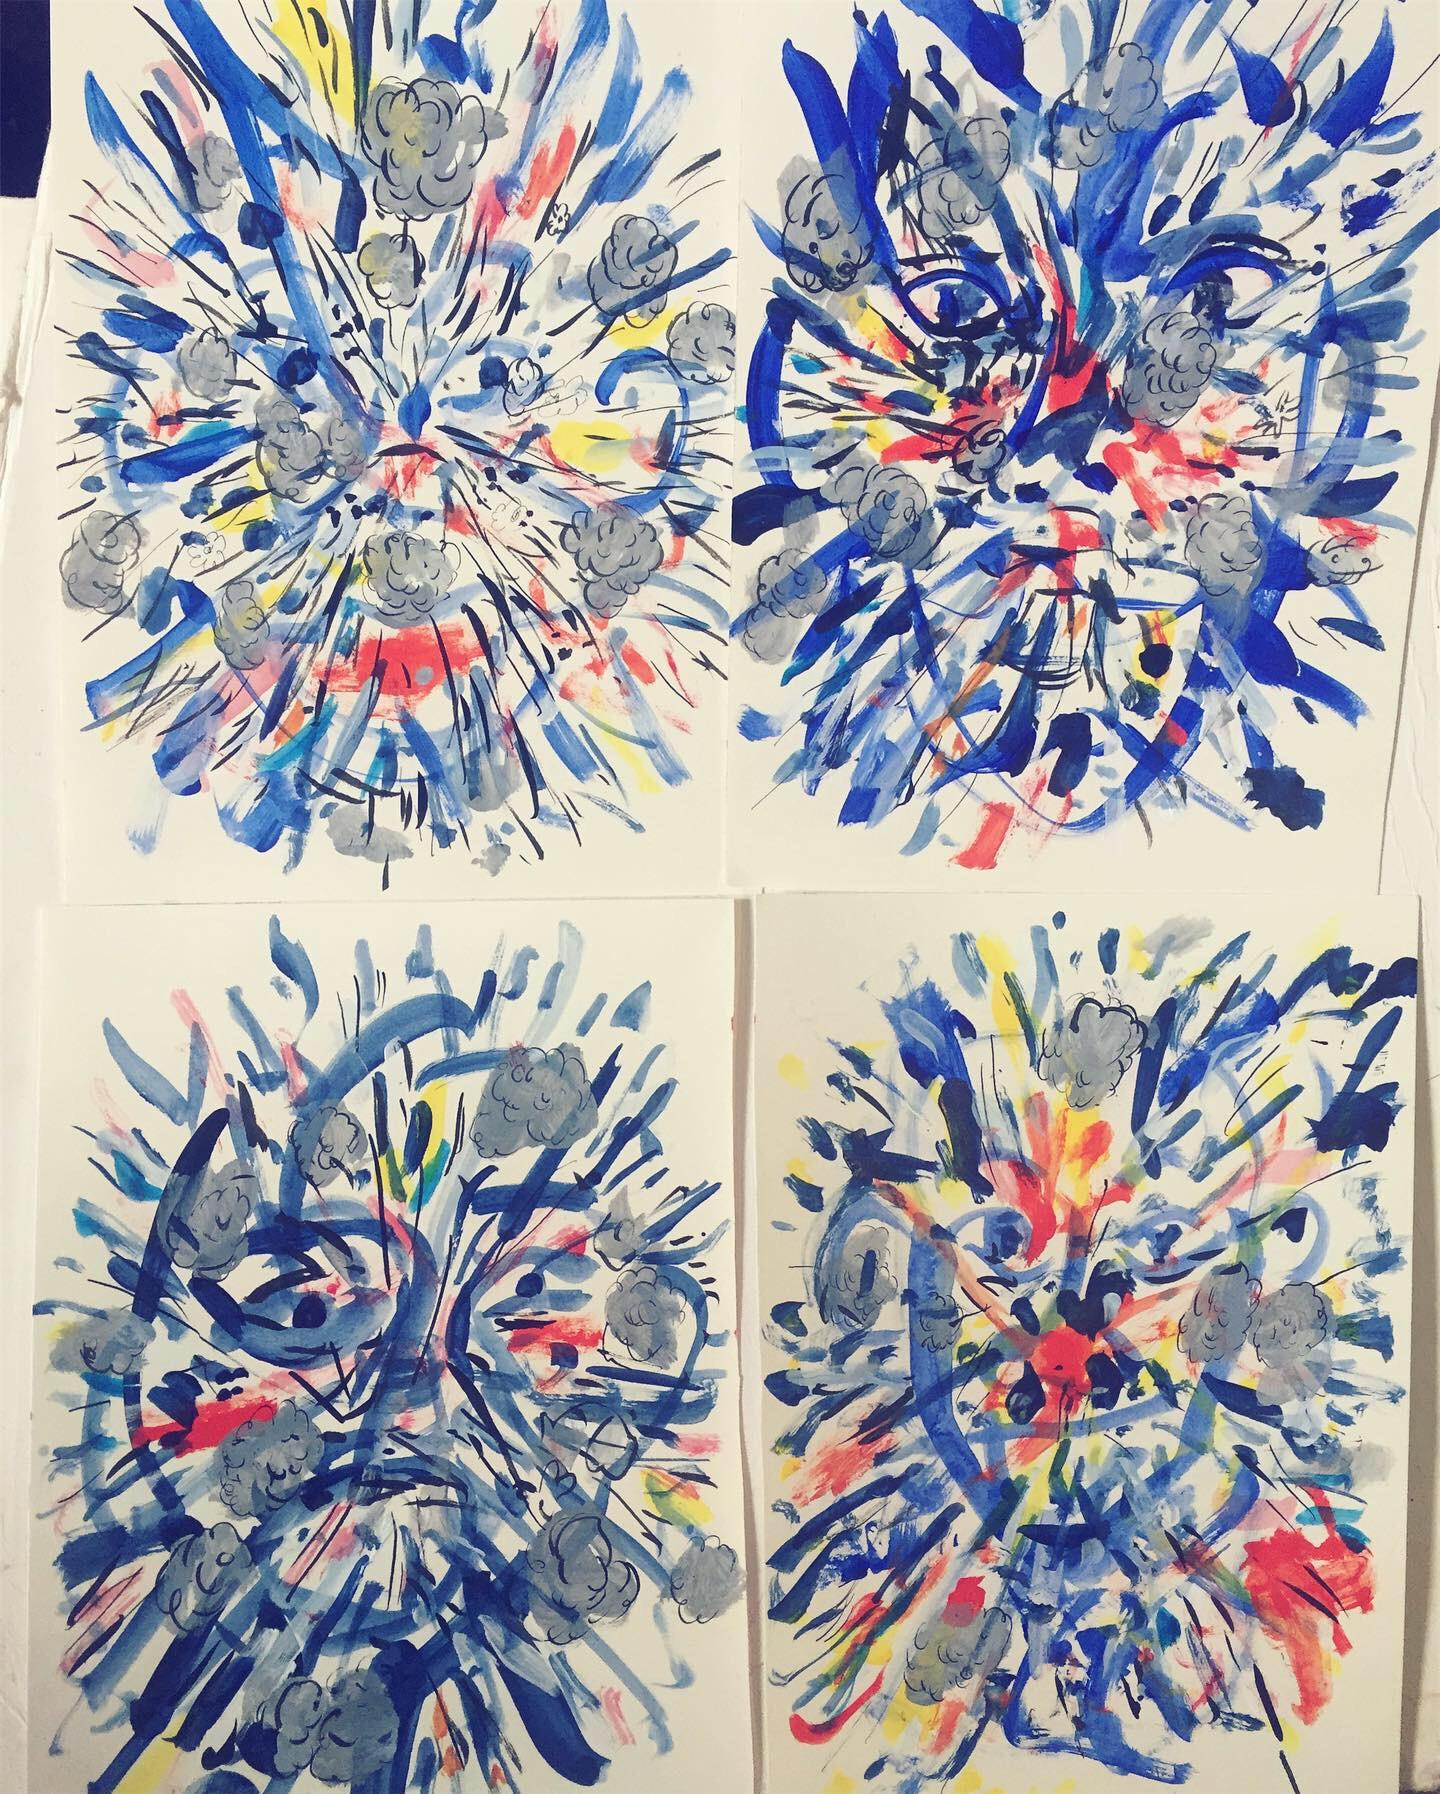 Face Explosion 1  (1 of 4 suite) 9x12 inches on paper - Art by Nina Bovasso